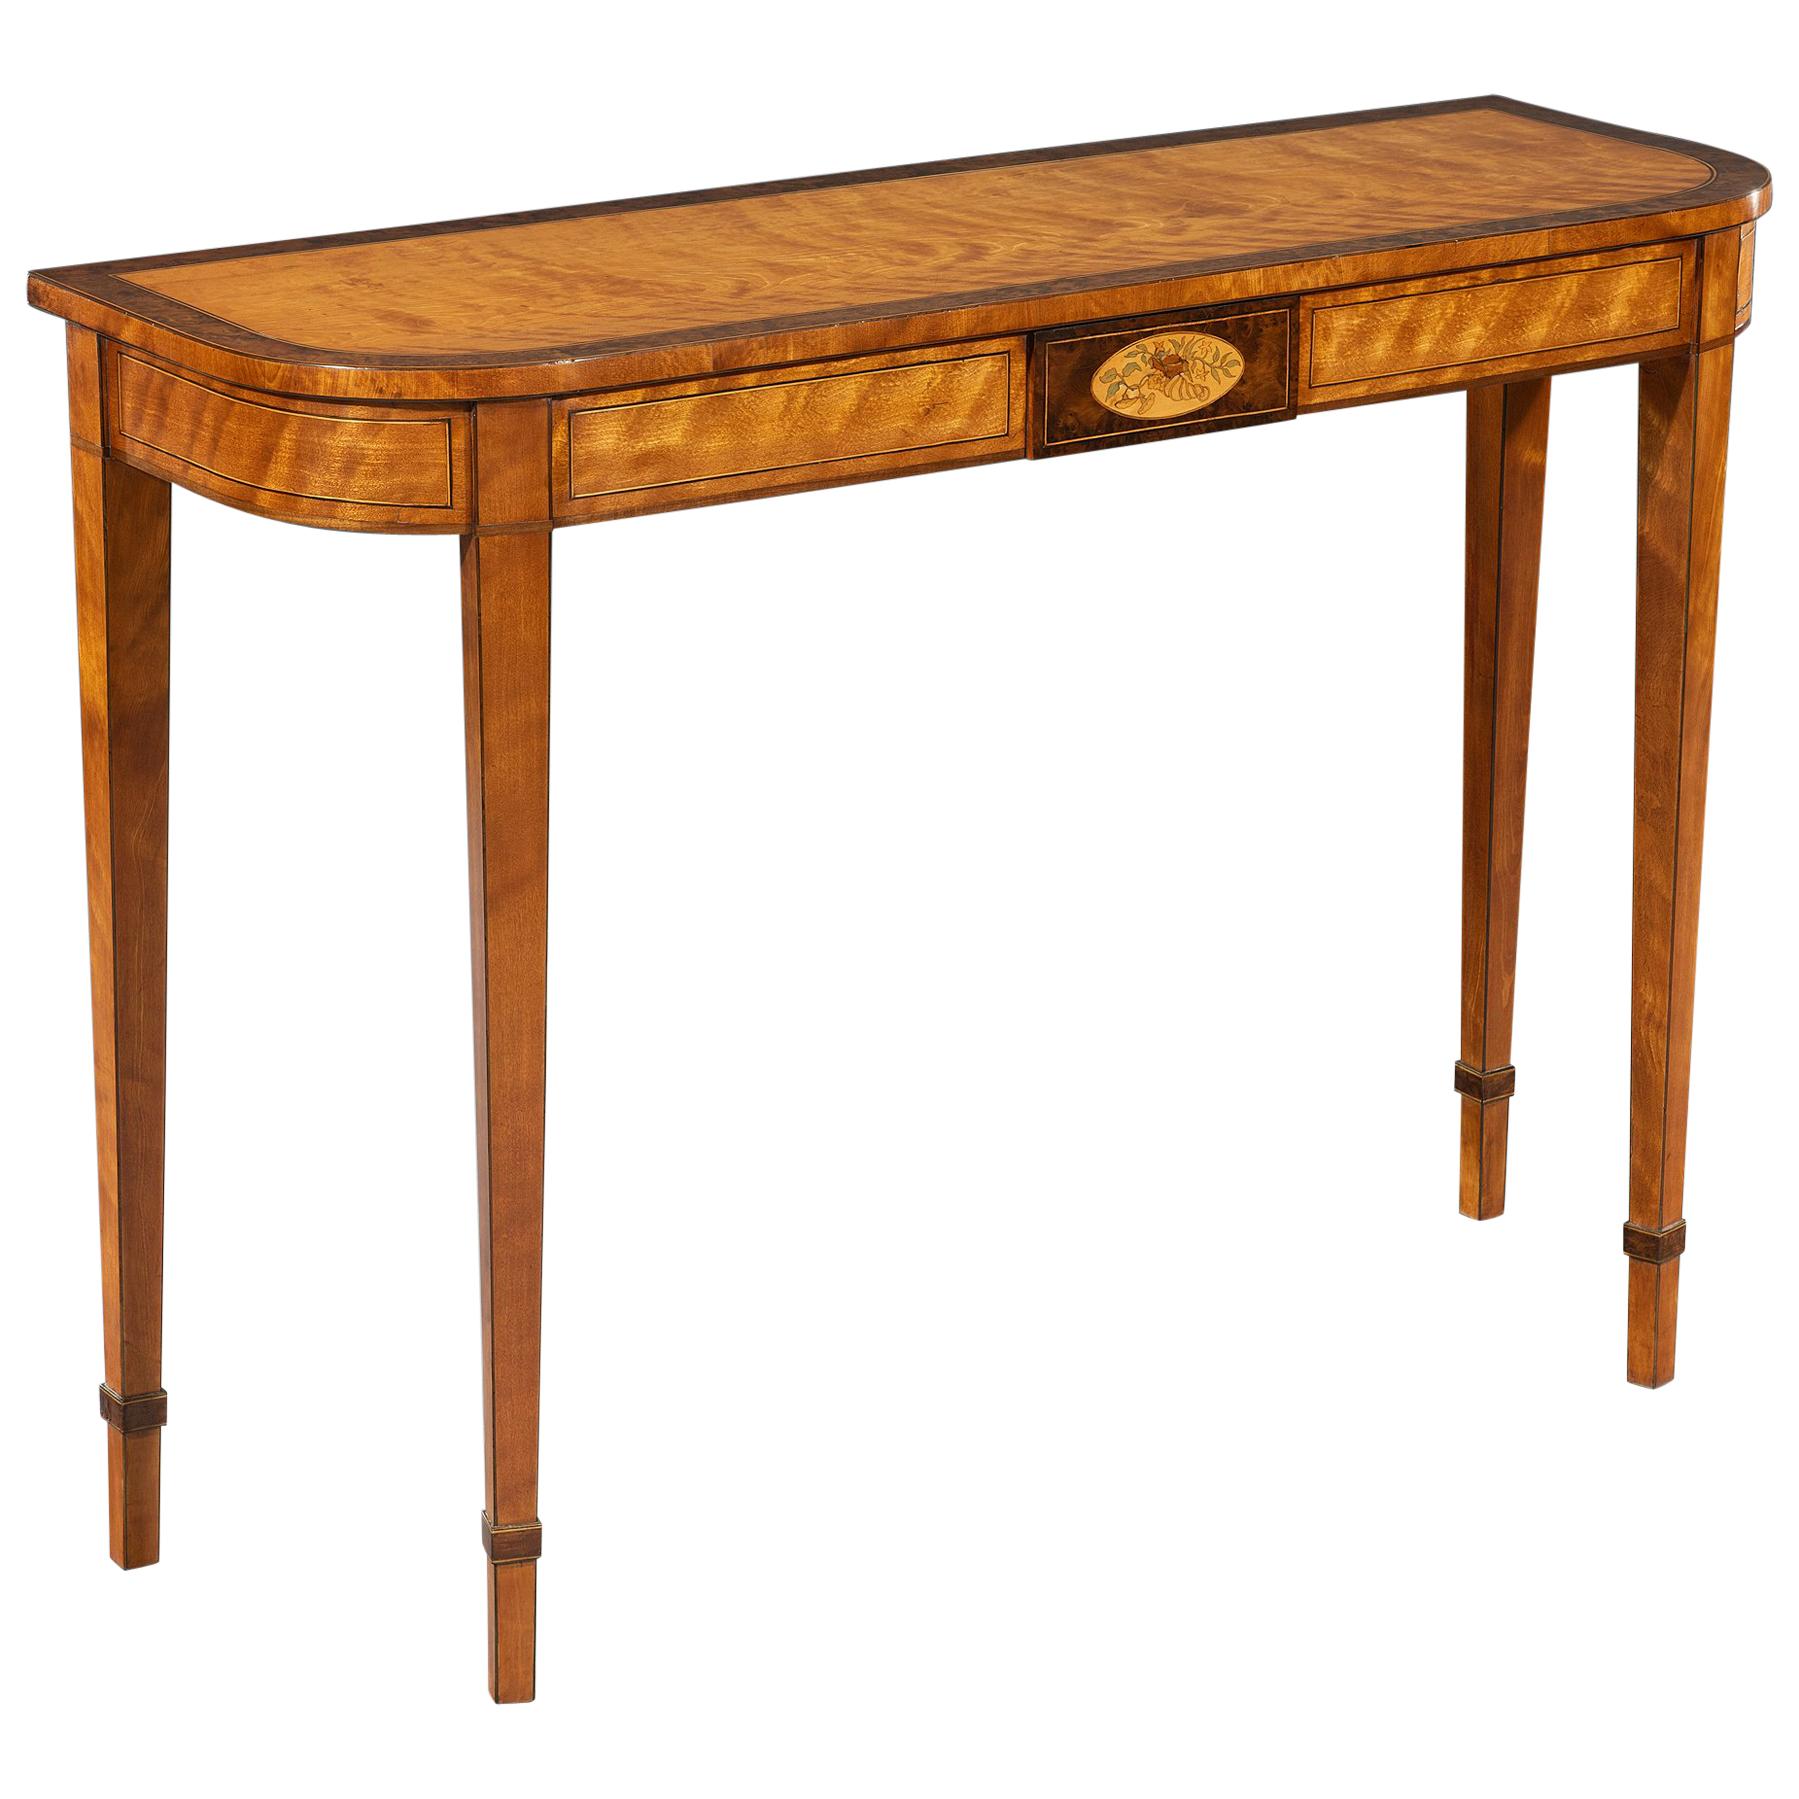 Late 18th Century West Indian Satinwood Inlaid Console Table For Sale